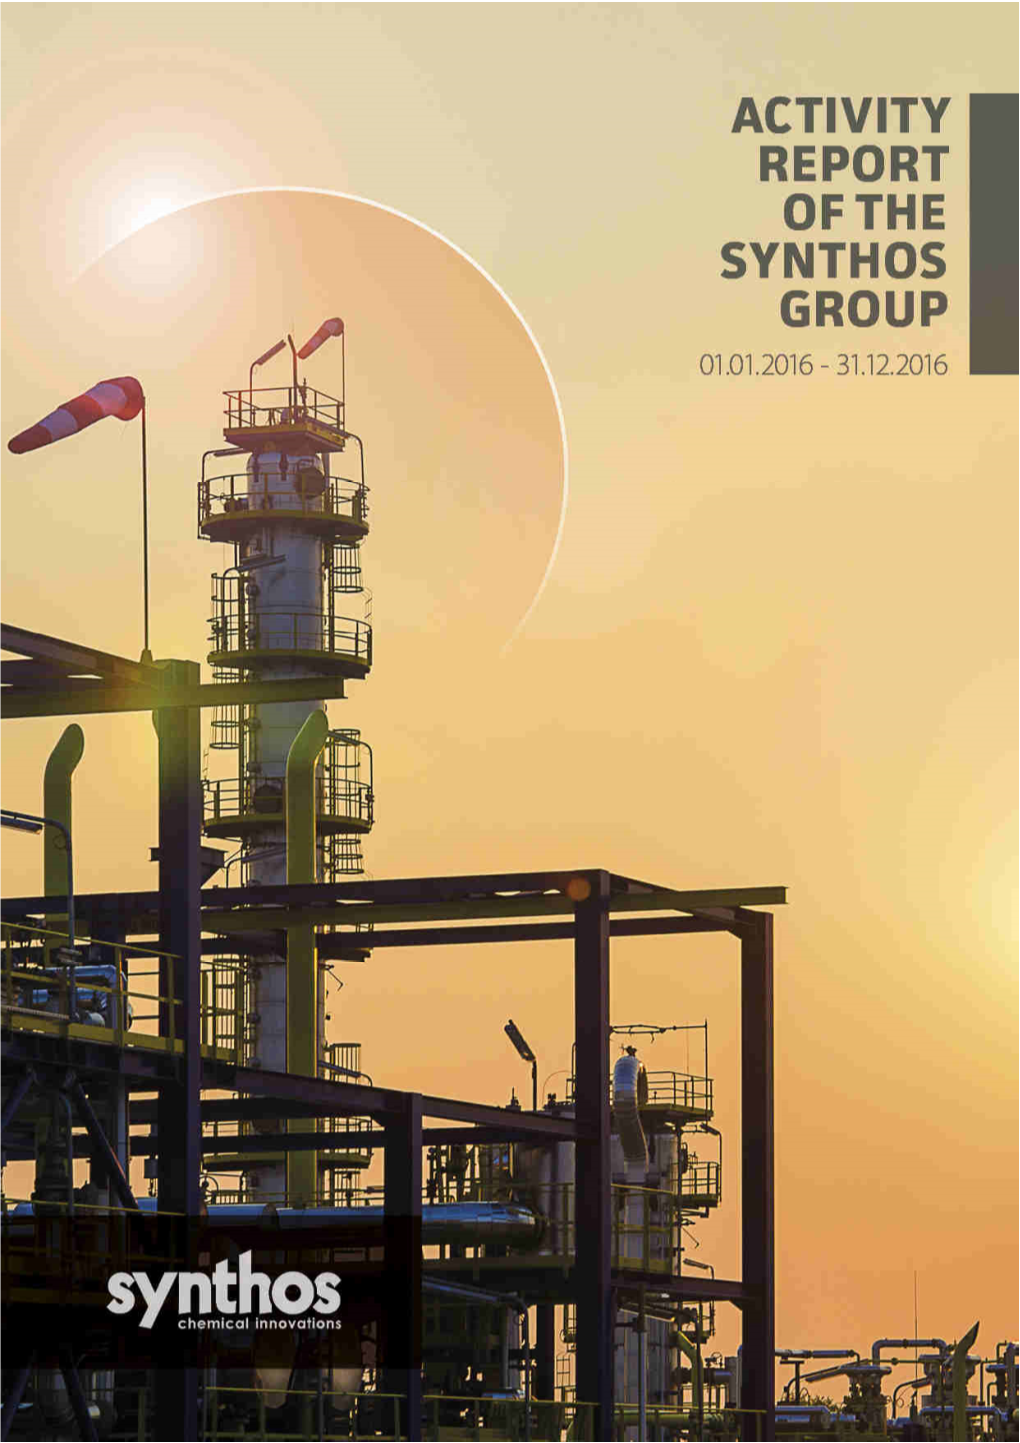 Activity Report of the Synthos Group